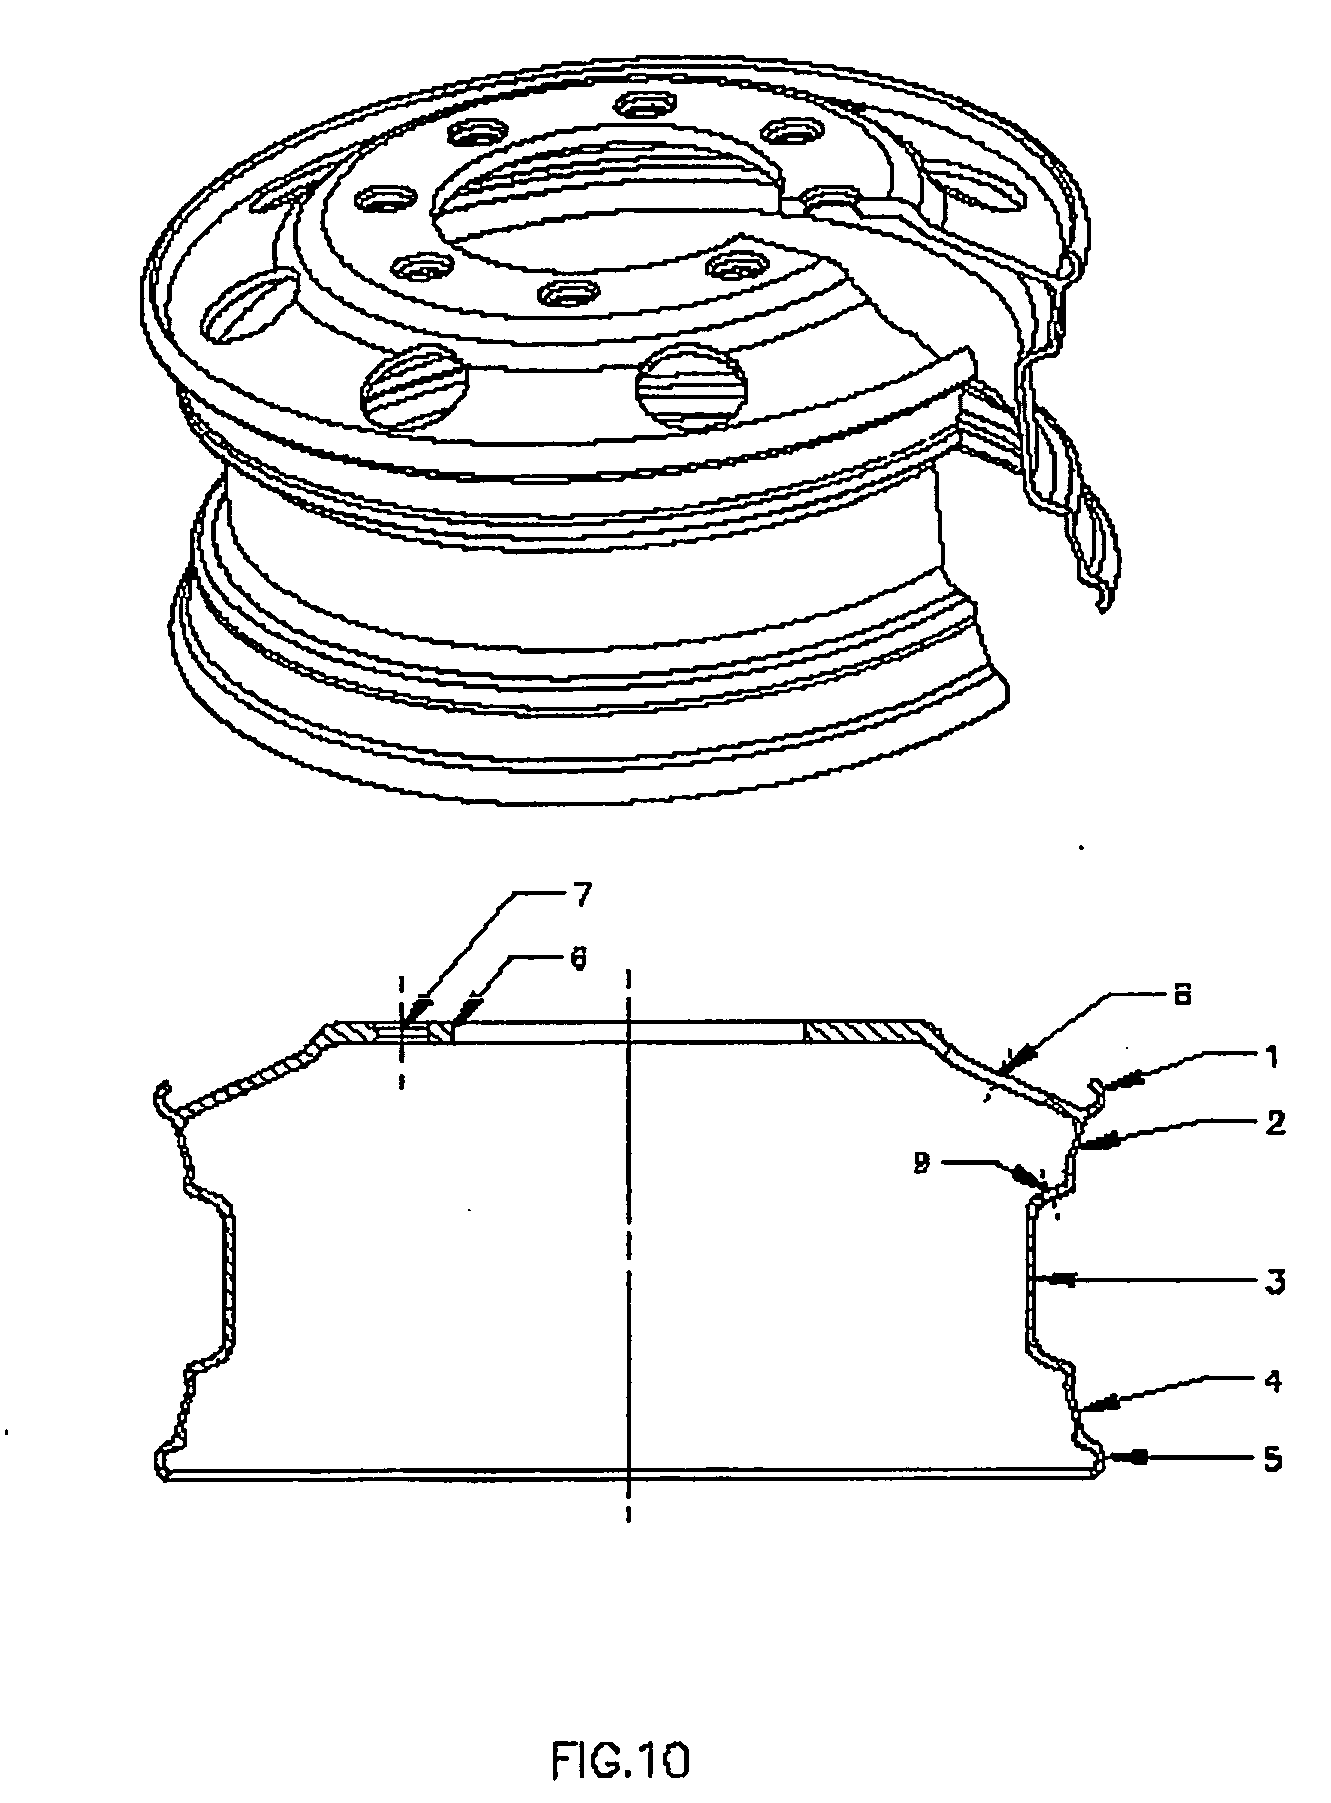 Wheels of Single Component Construction and Method of Making Same